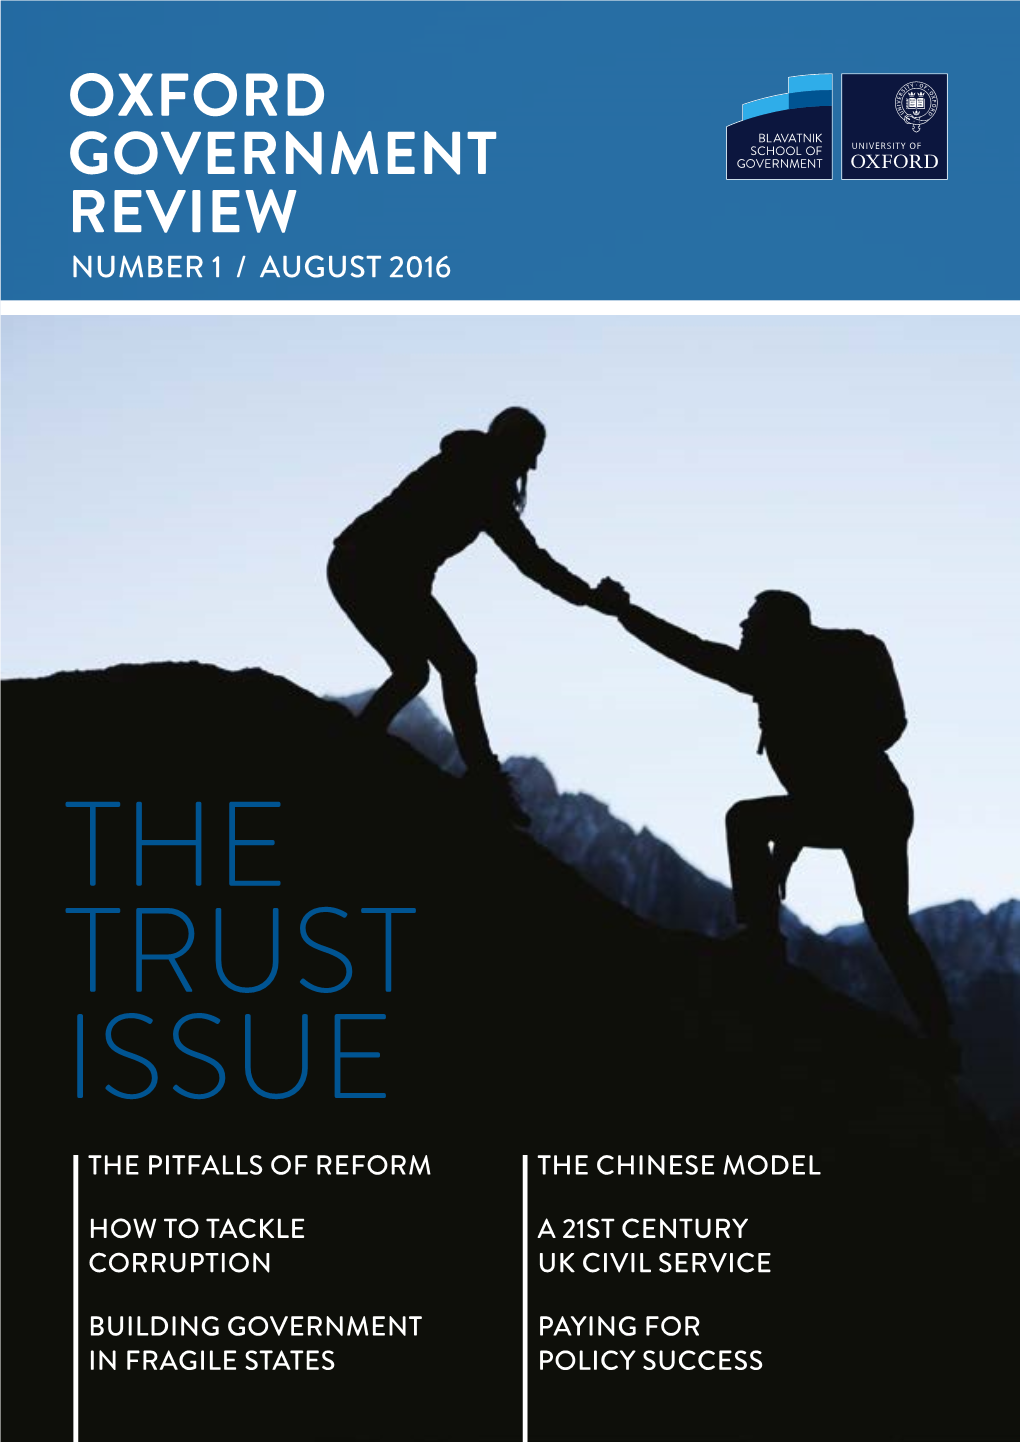 Oxford Government Review Number 1 / August 2016